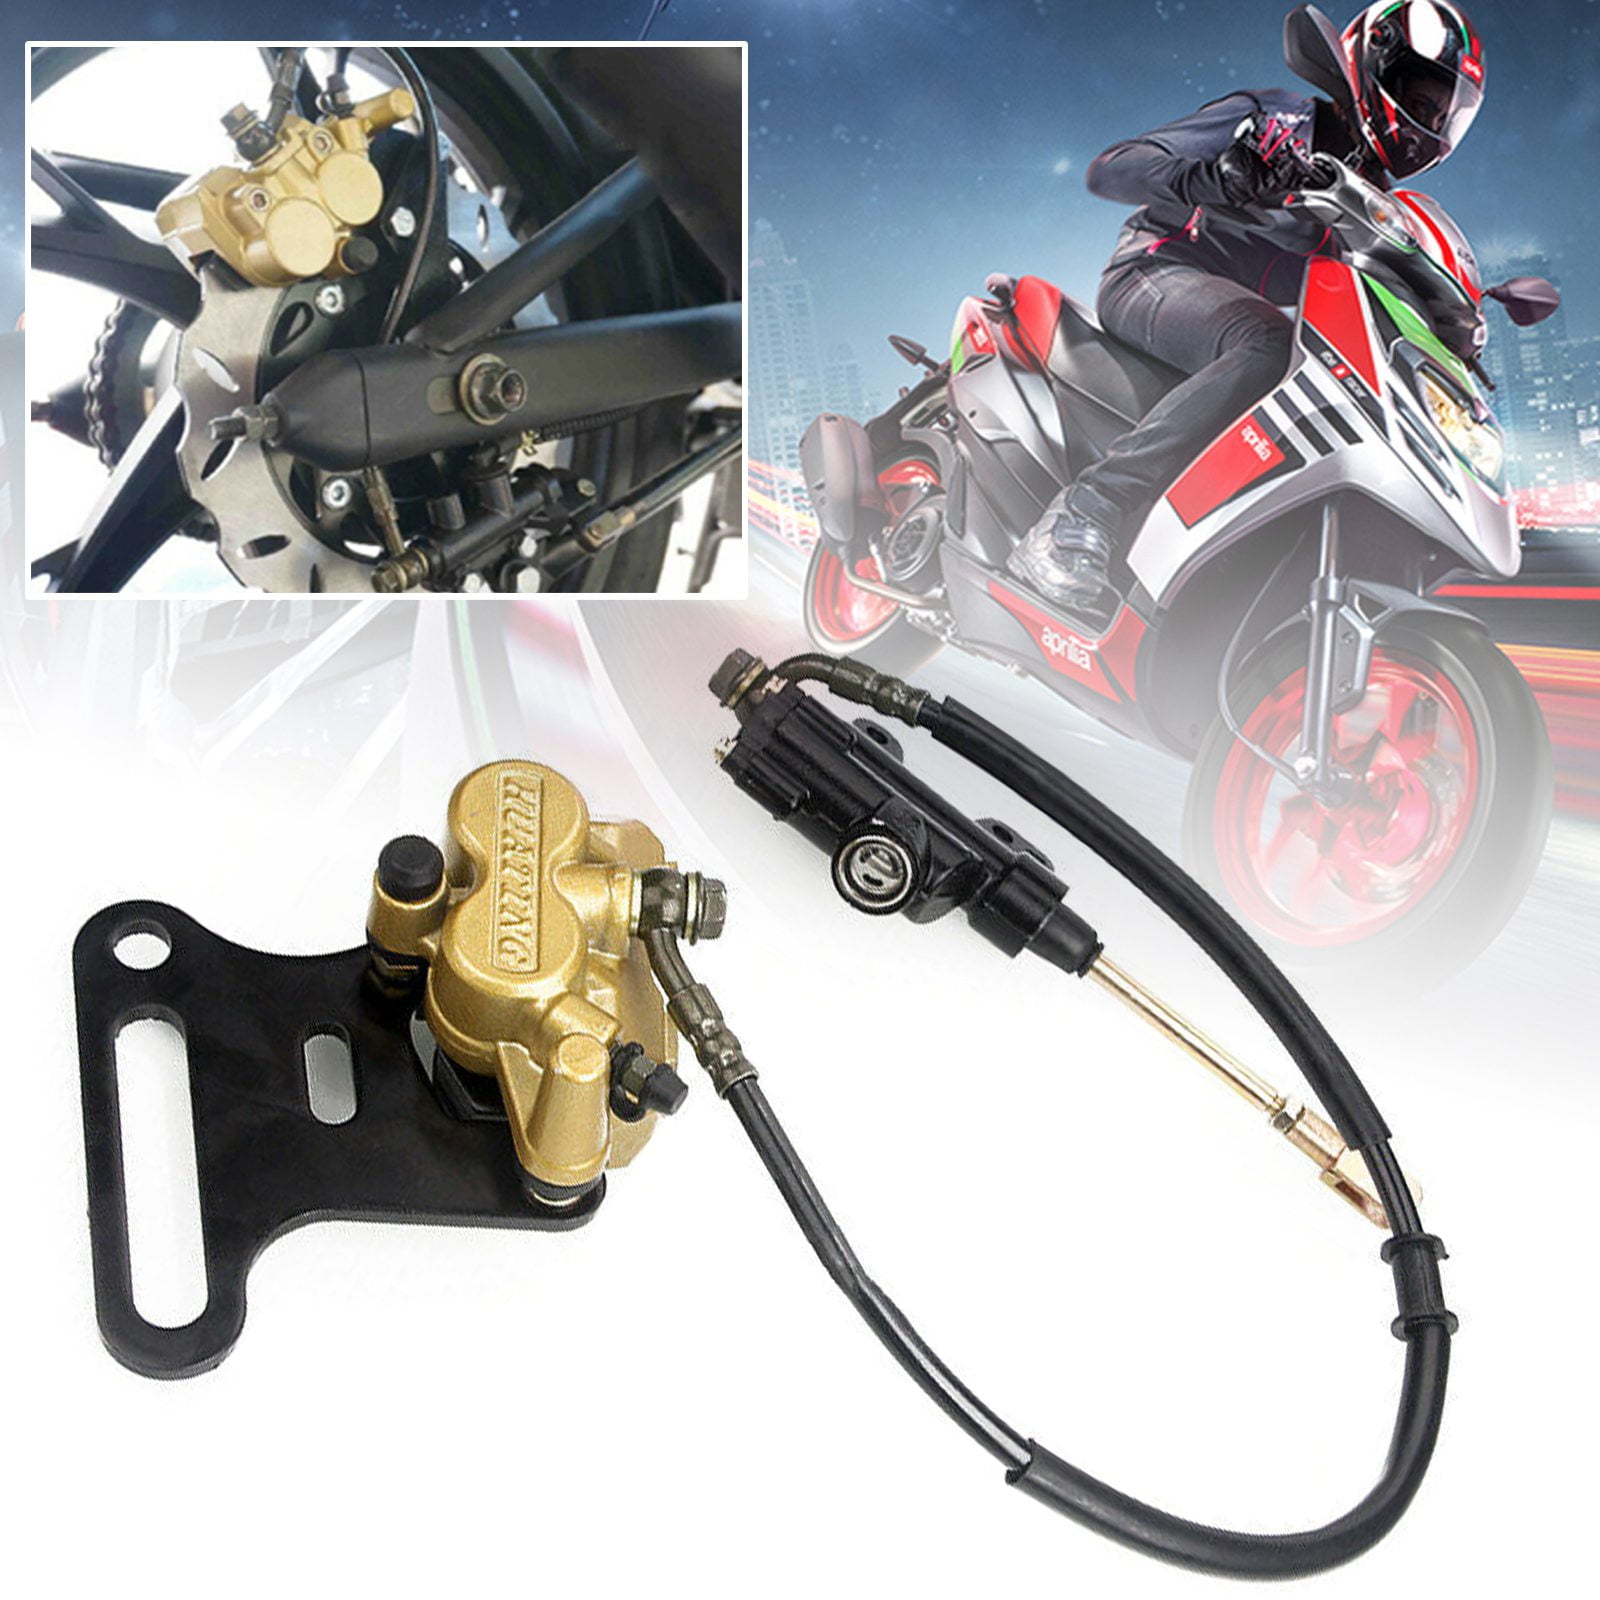 Hydraulic Rear Disc Brake Caliper with Master Cylinder & Brake Pads Brake System Fit 110cc 125cc 140cc 150cc PIT PRO PIT Bike Trail Bike Dirt Bike Easy Installation Direct replacement 48 cm Cable 